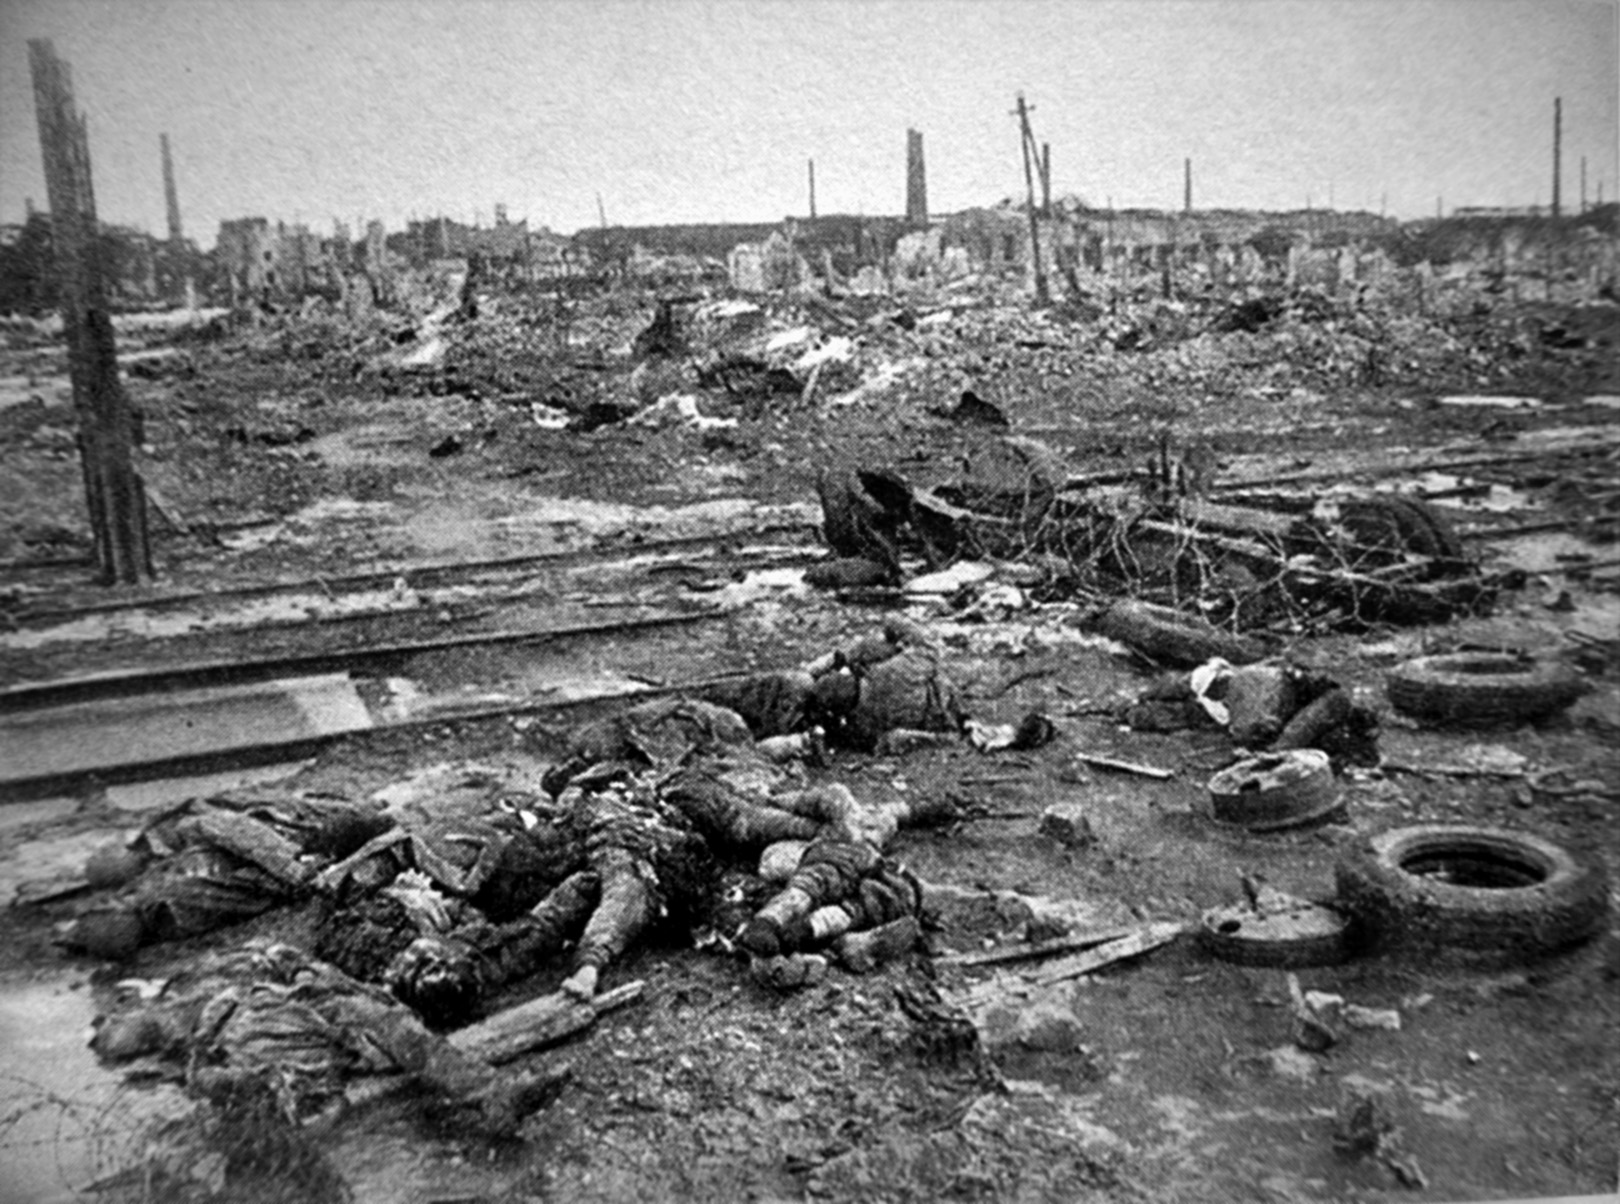 Corpses of either German or Soviet soldiers litter the ground at Stalingrad. The Soviets had over a million men killed or wounded in the fighting while Germany and its allies suffered about 760,000 casualties. 